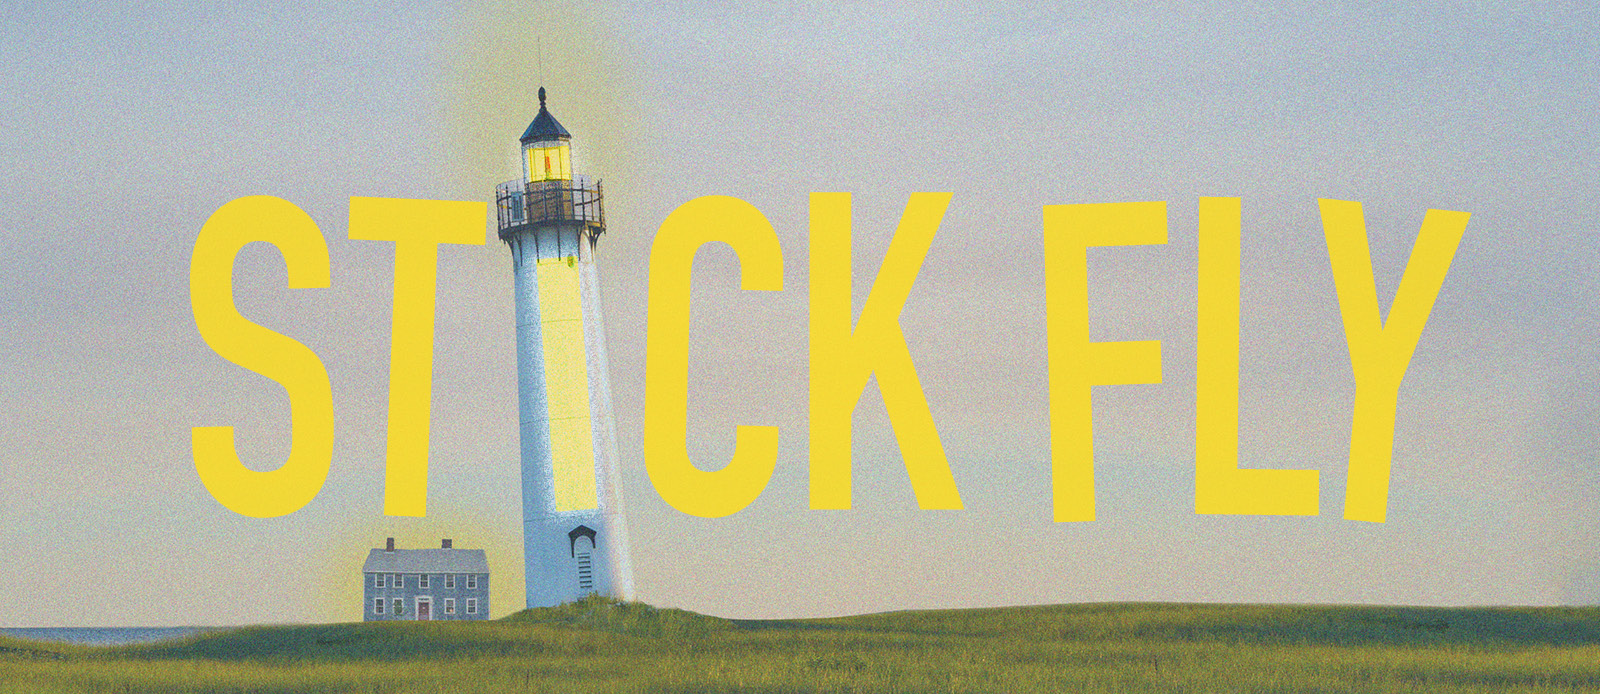 The words "Stick Fly" are written in yellow text across a pale blue sky in a coastal environment. The letter "i" is made of a lighthouse.